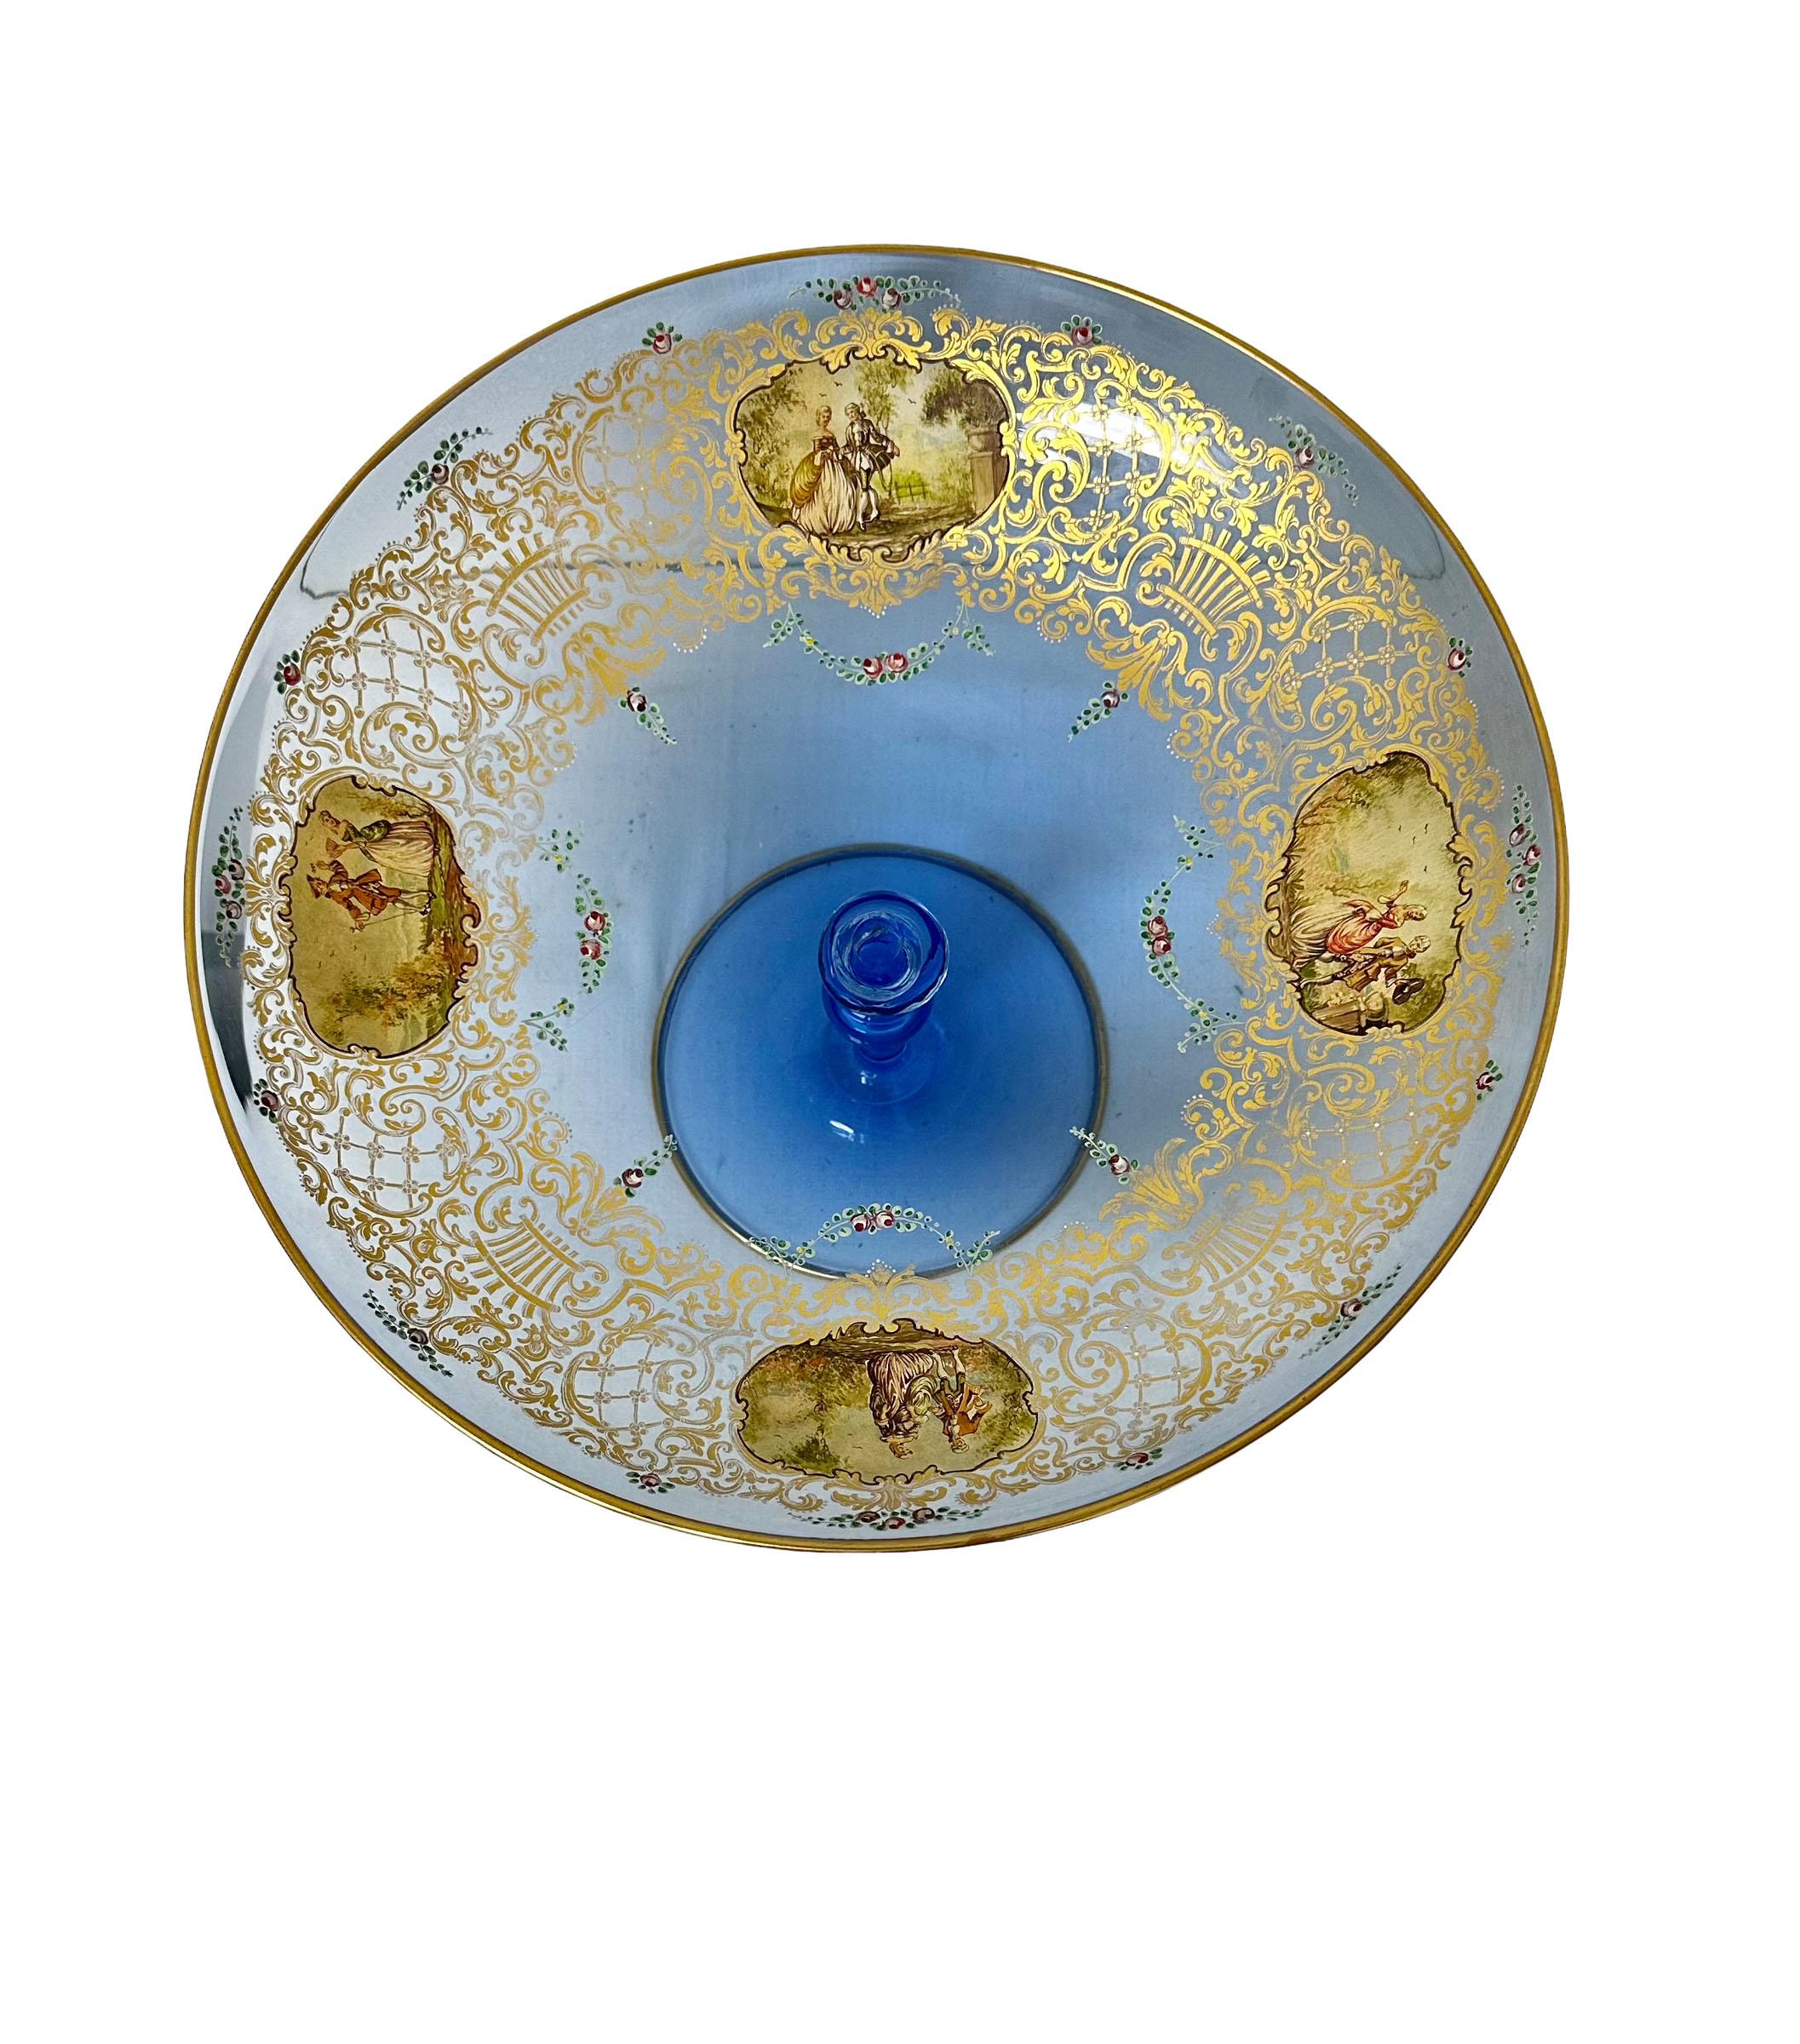 A beautiful turn of the century blue Murano footed fruit bowl with gold gilt. Four painted figures in cartouche. The gilding is perfect.